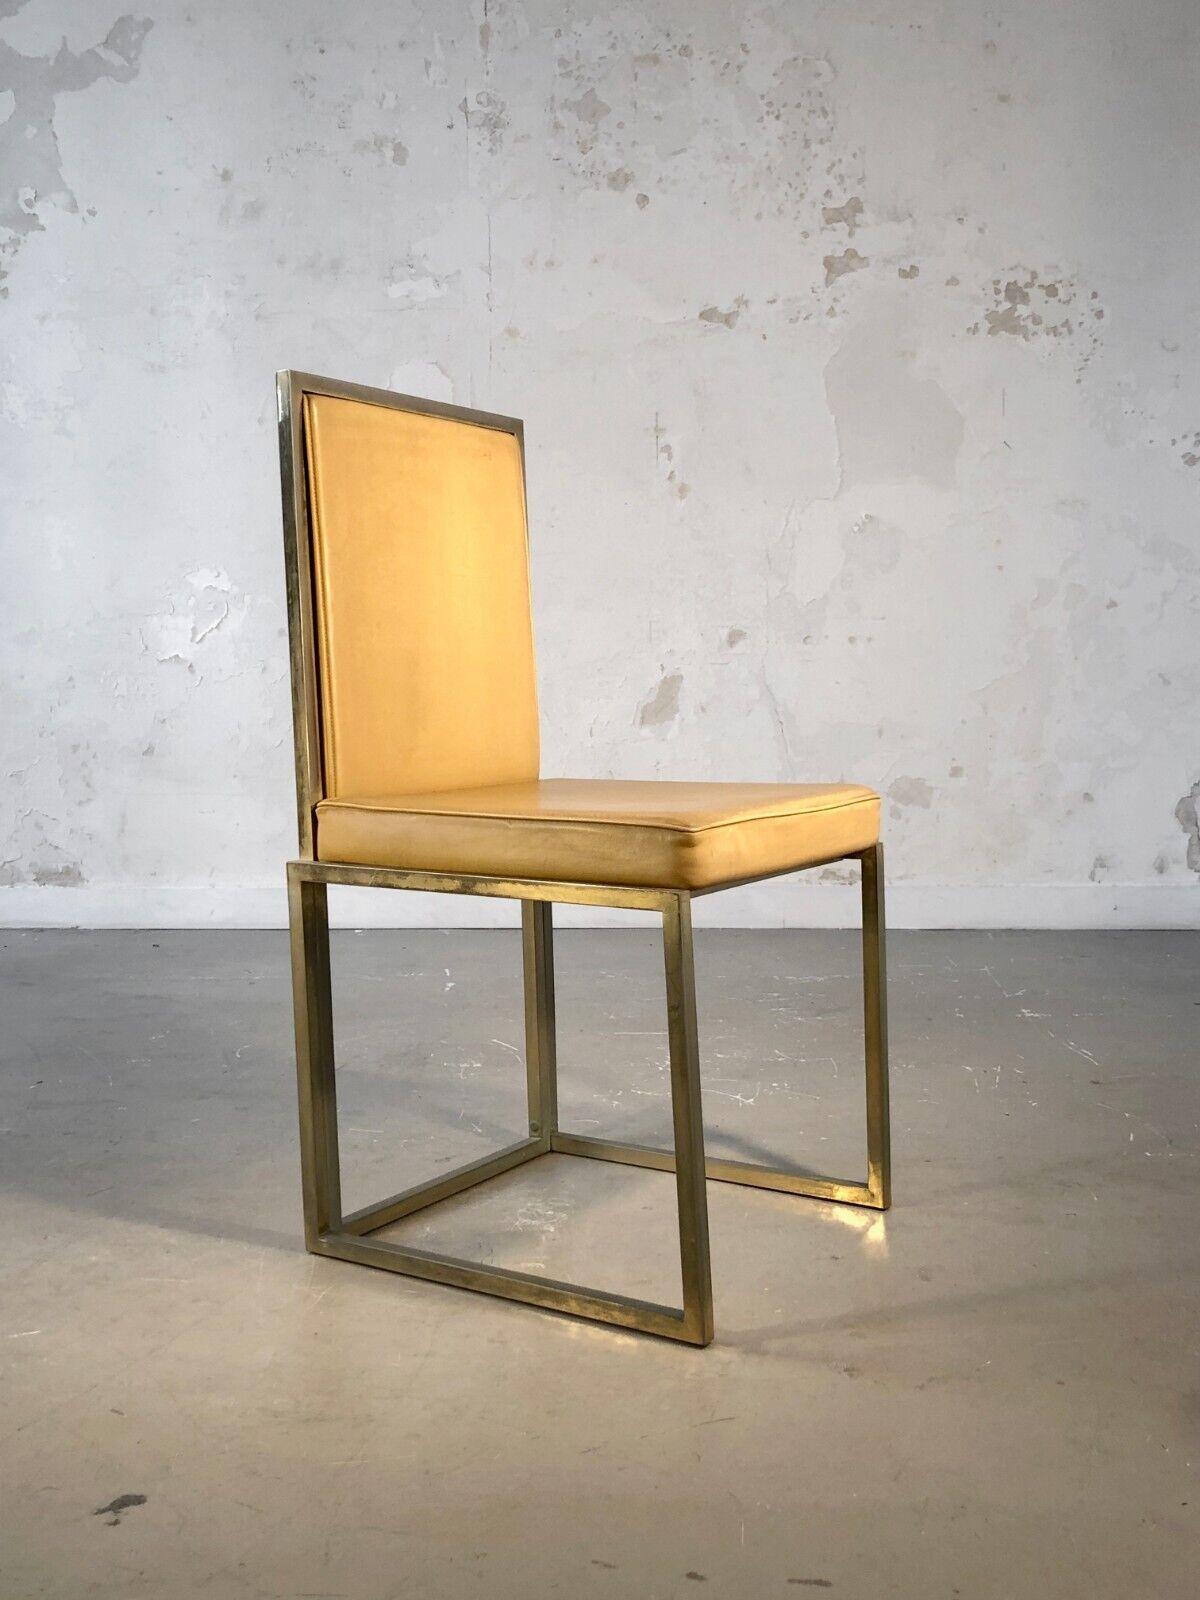 An elegant geometric chair, Post-Modernist, Shabby-Chic, Bauhaus, square section metal structure with irregular and faded gilding and architectural details, interlocking geometric seat and back in light caramel imitation leather, attributed to